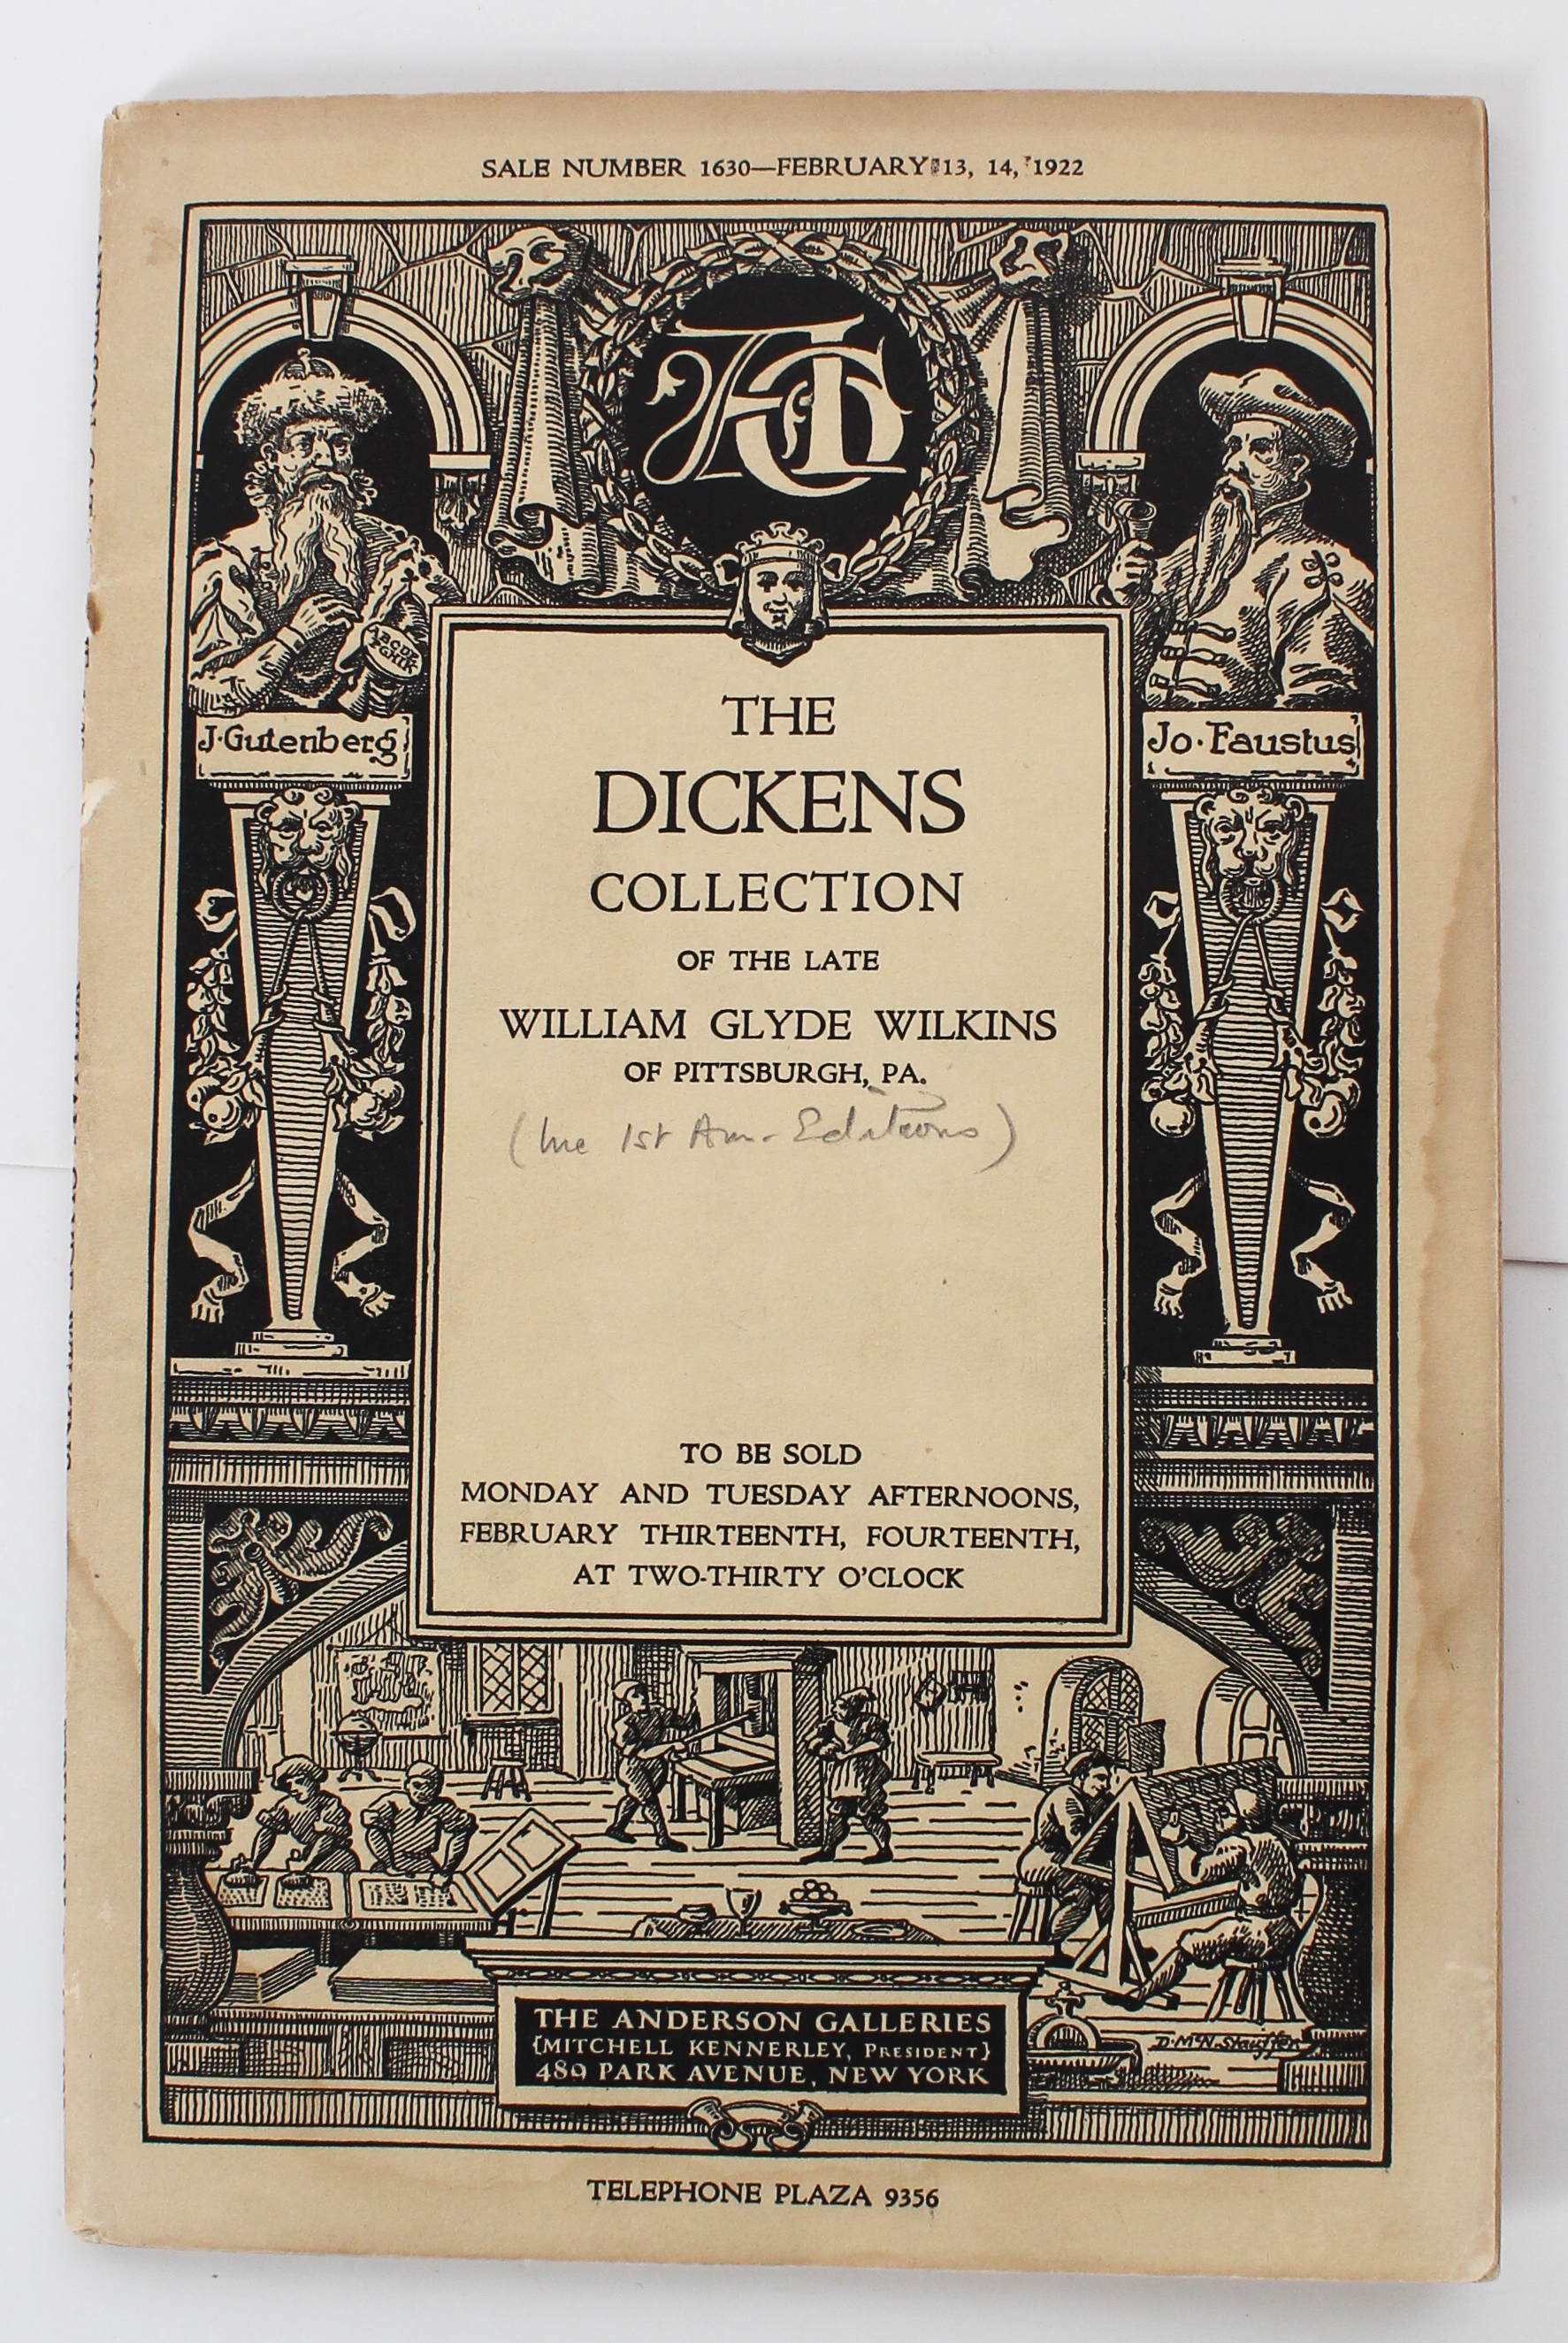 Dickens Auction Sales Catalogues 1916-1971 - Image 2 of 5